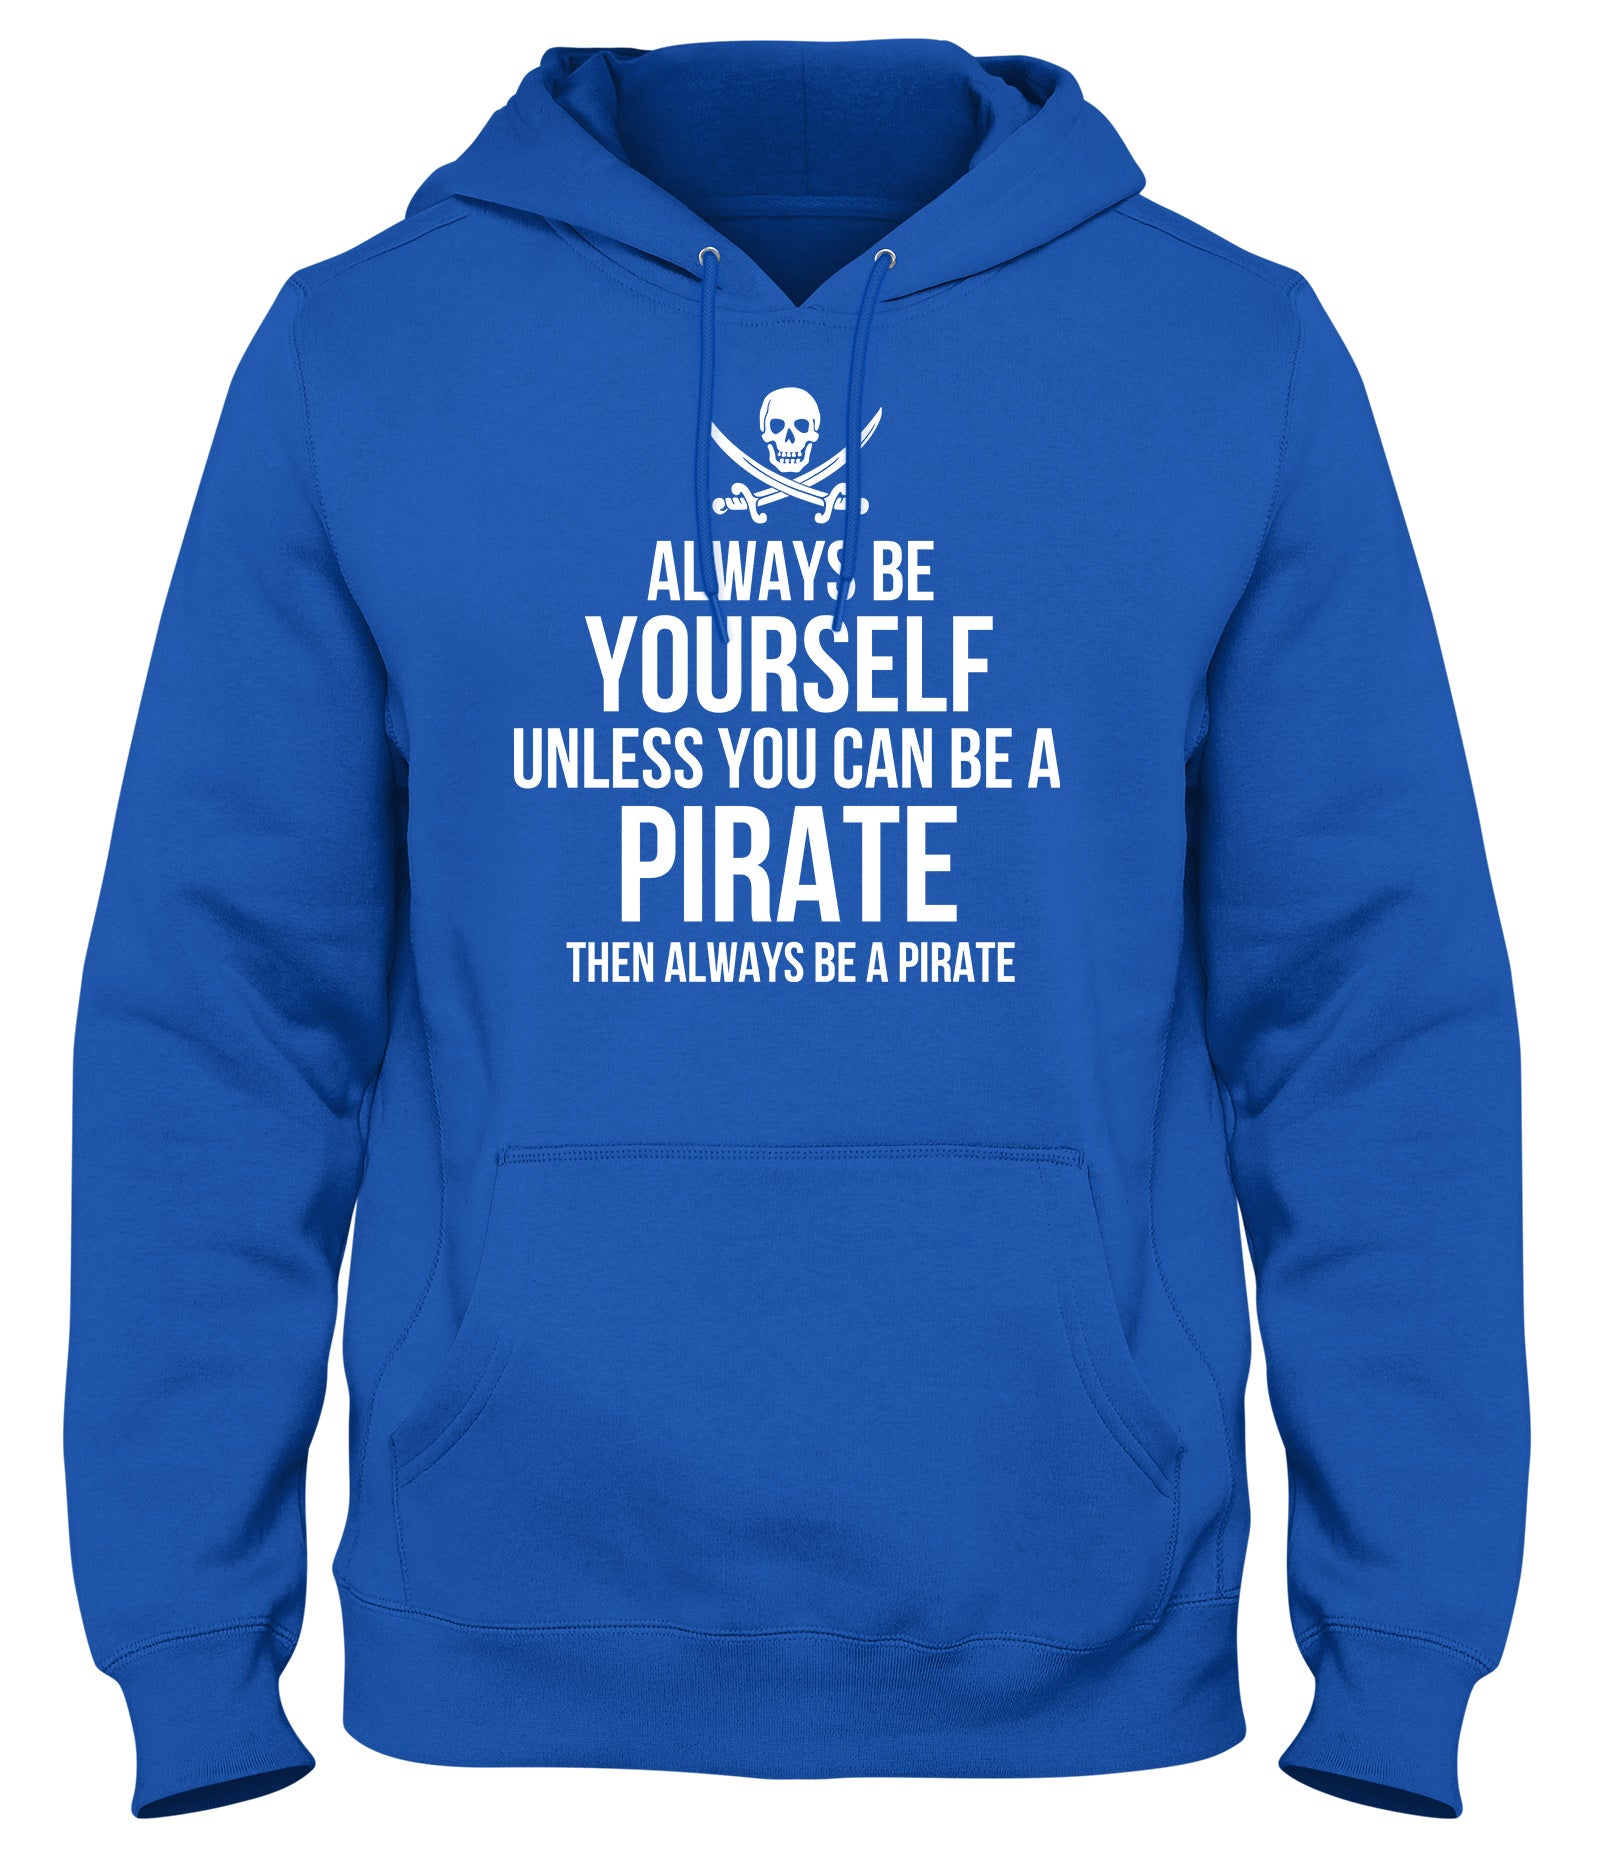 ALWAYS BE YOURSELF UNLESS YOU CAN BE A PIRATE THEN ALWAYS BE A PIRATE MENS WOMENS LADIES UNISEX FUNNY SLOGAN HOODIE